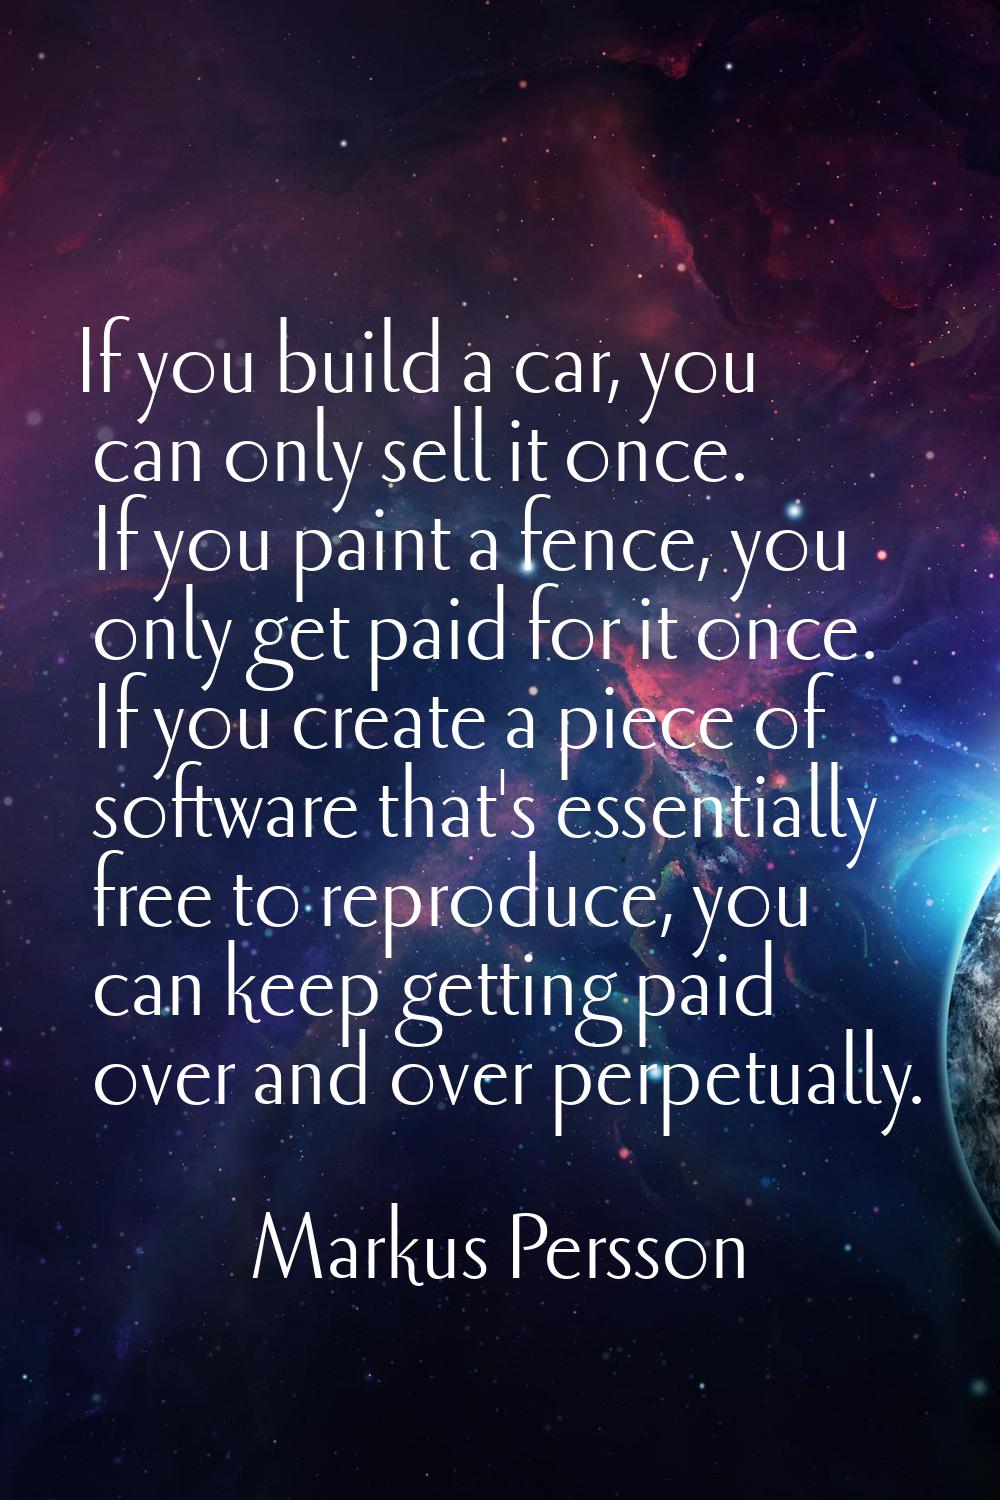 If you build a car, you can only sell it once. If you paint a fence, you only get paid for it once.